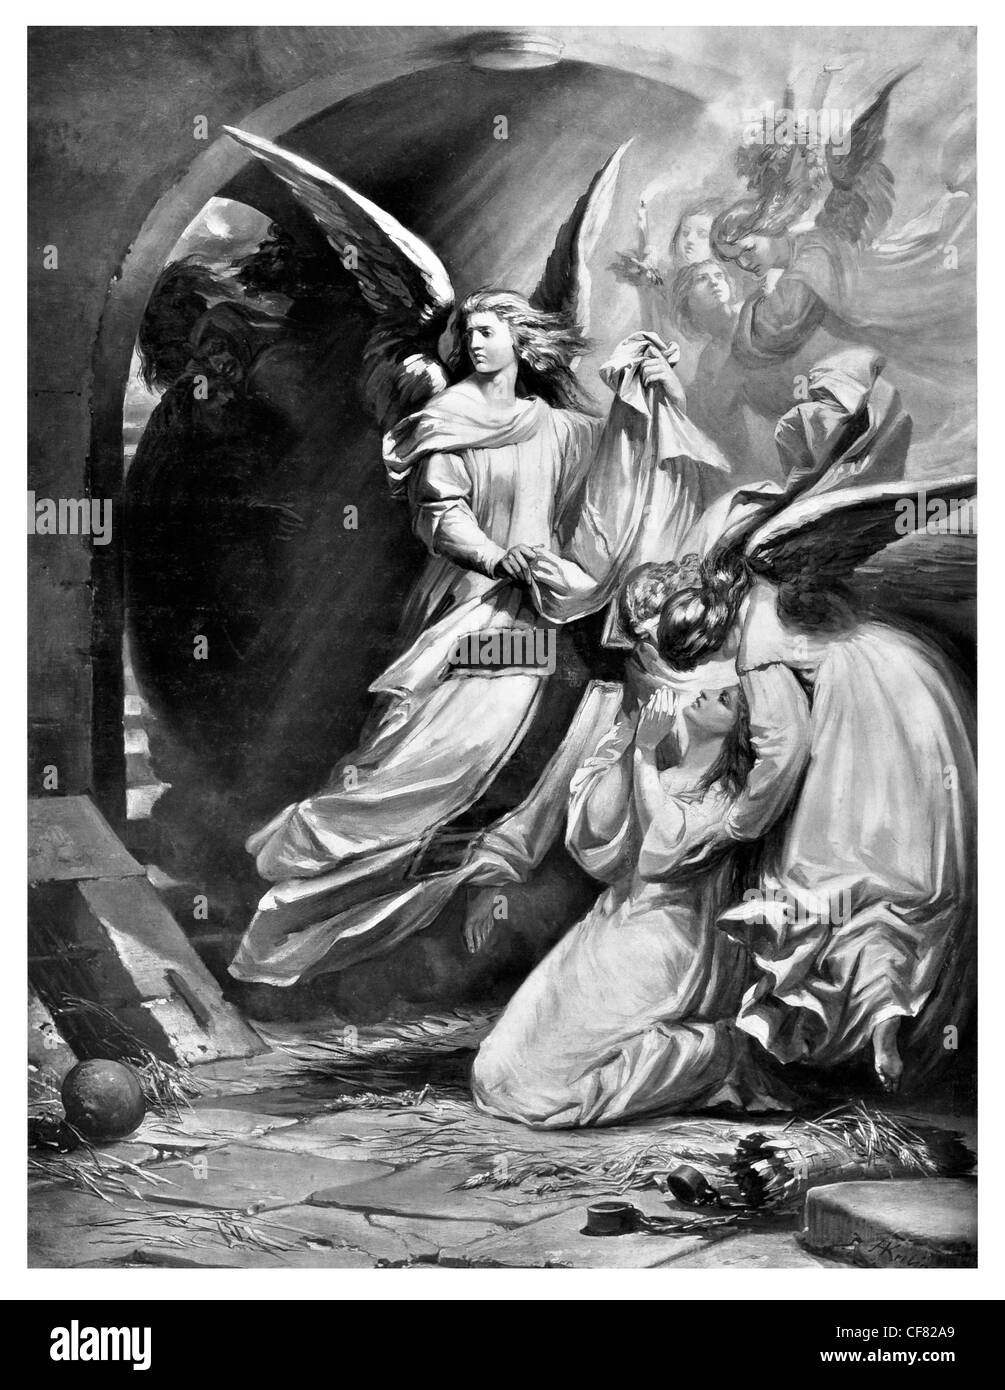 Faust  Johann Wolfgang von Goethe A tragedy 1870 period costume magical magic tale legend myth story drama theatre act character Stock Photo